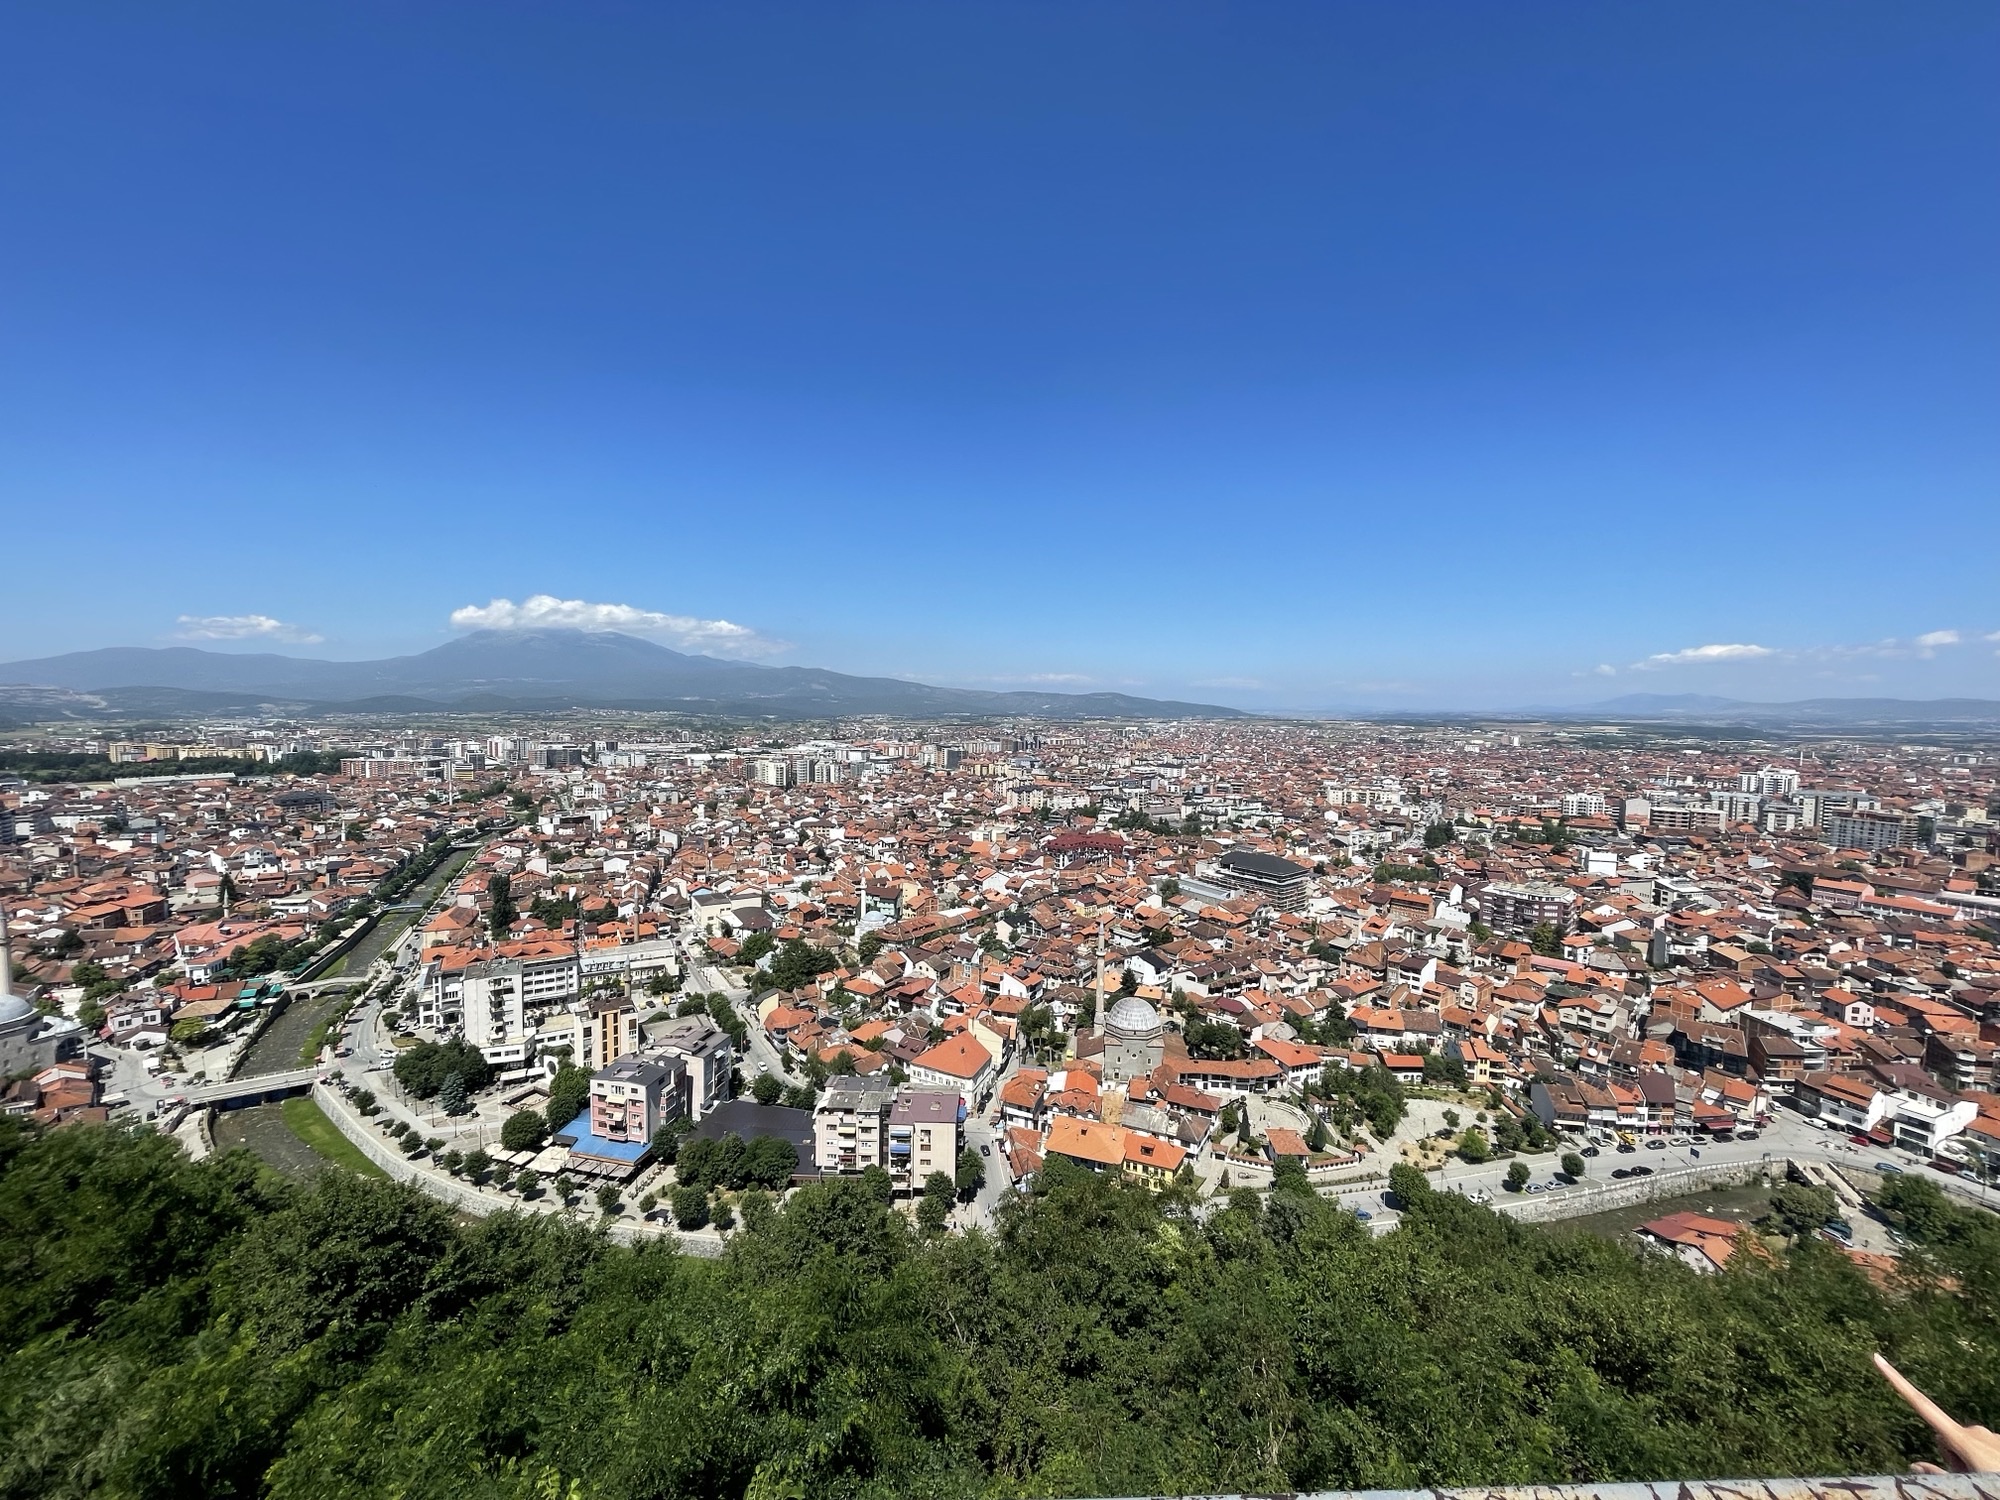 A view of Prizren from the front wall of the fortress.